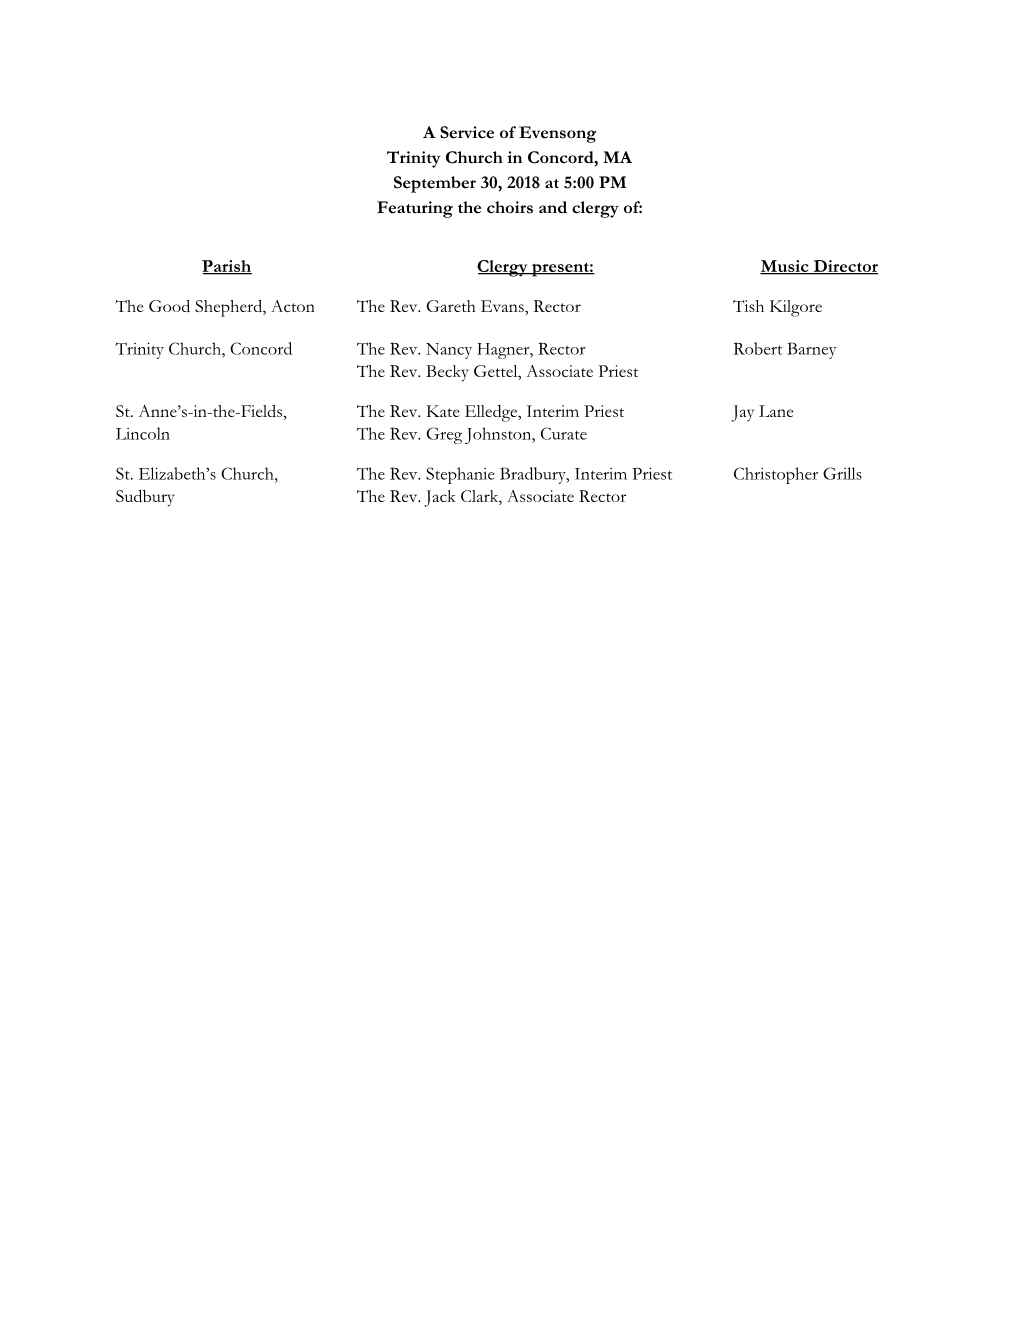 A Service of Evensong Trinity Church in Concord, MA September 30, 2018 at 5:00 PM Featuring the Choirs and Clergy Of